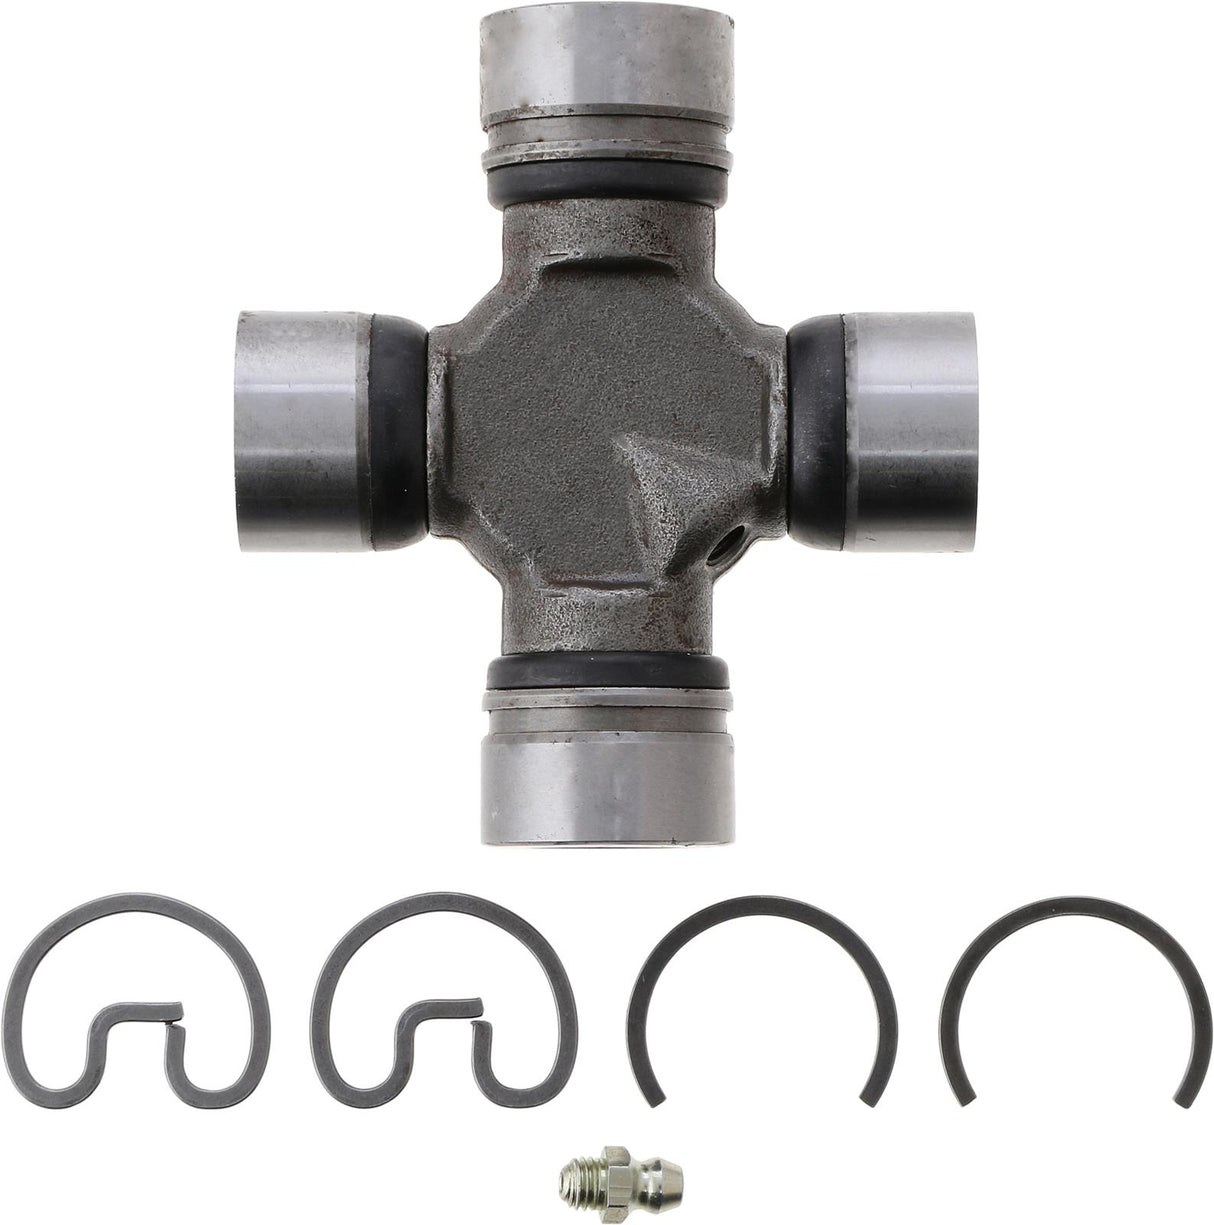 DANA - SPICER HEAVY AXLE ­-­ 25-3222X ­-­ UNIVERSAL JOINT GREASEABLE 7290-1310 SERIES